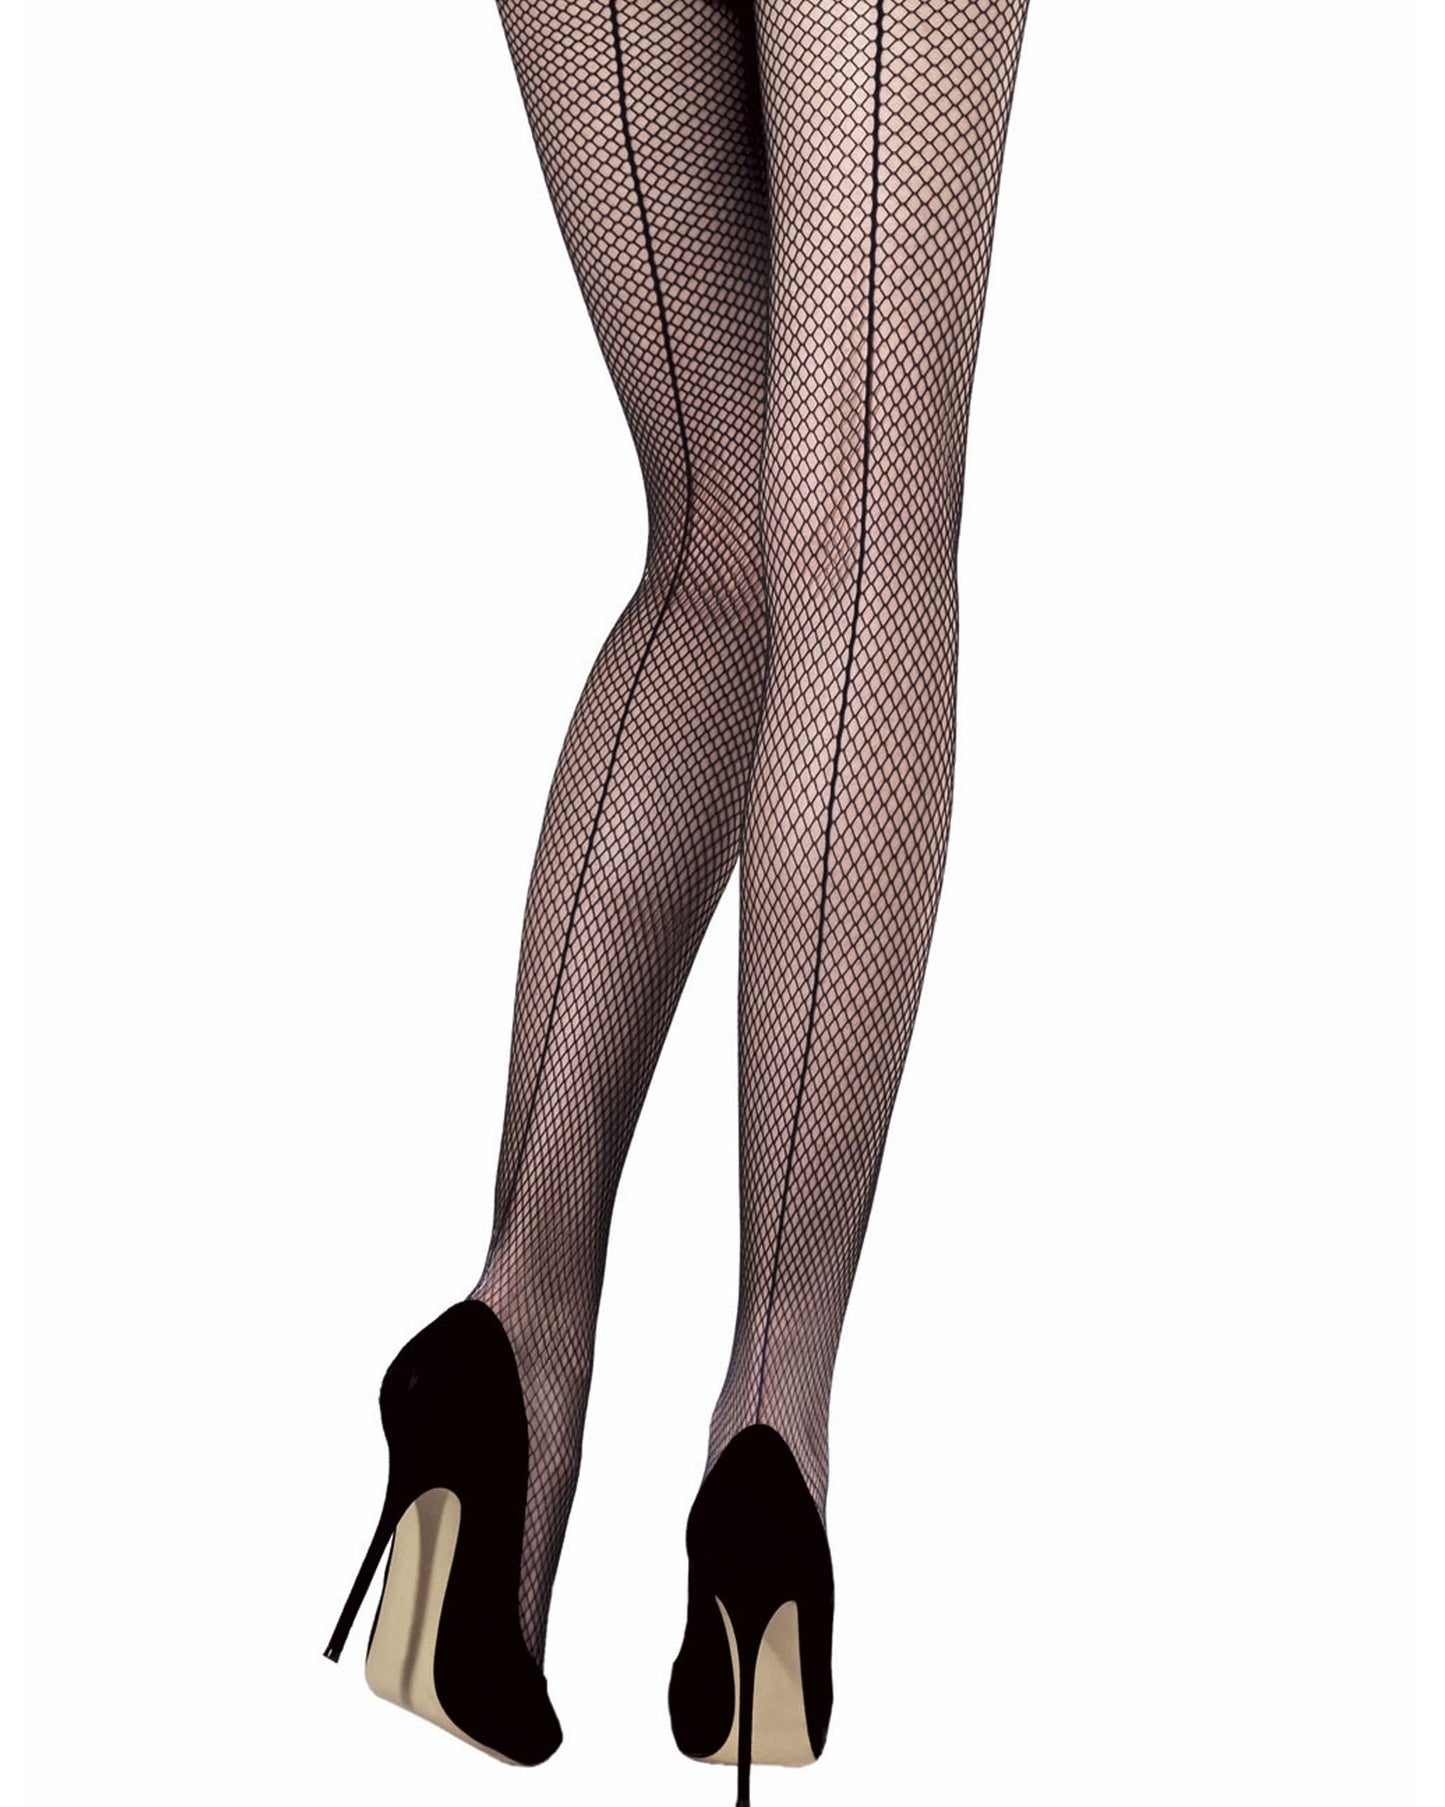 Back Seam Fishnet Tights - Black classic fishnet tights with a back seam line.